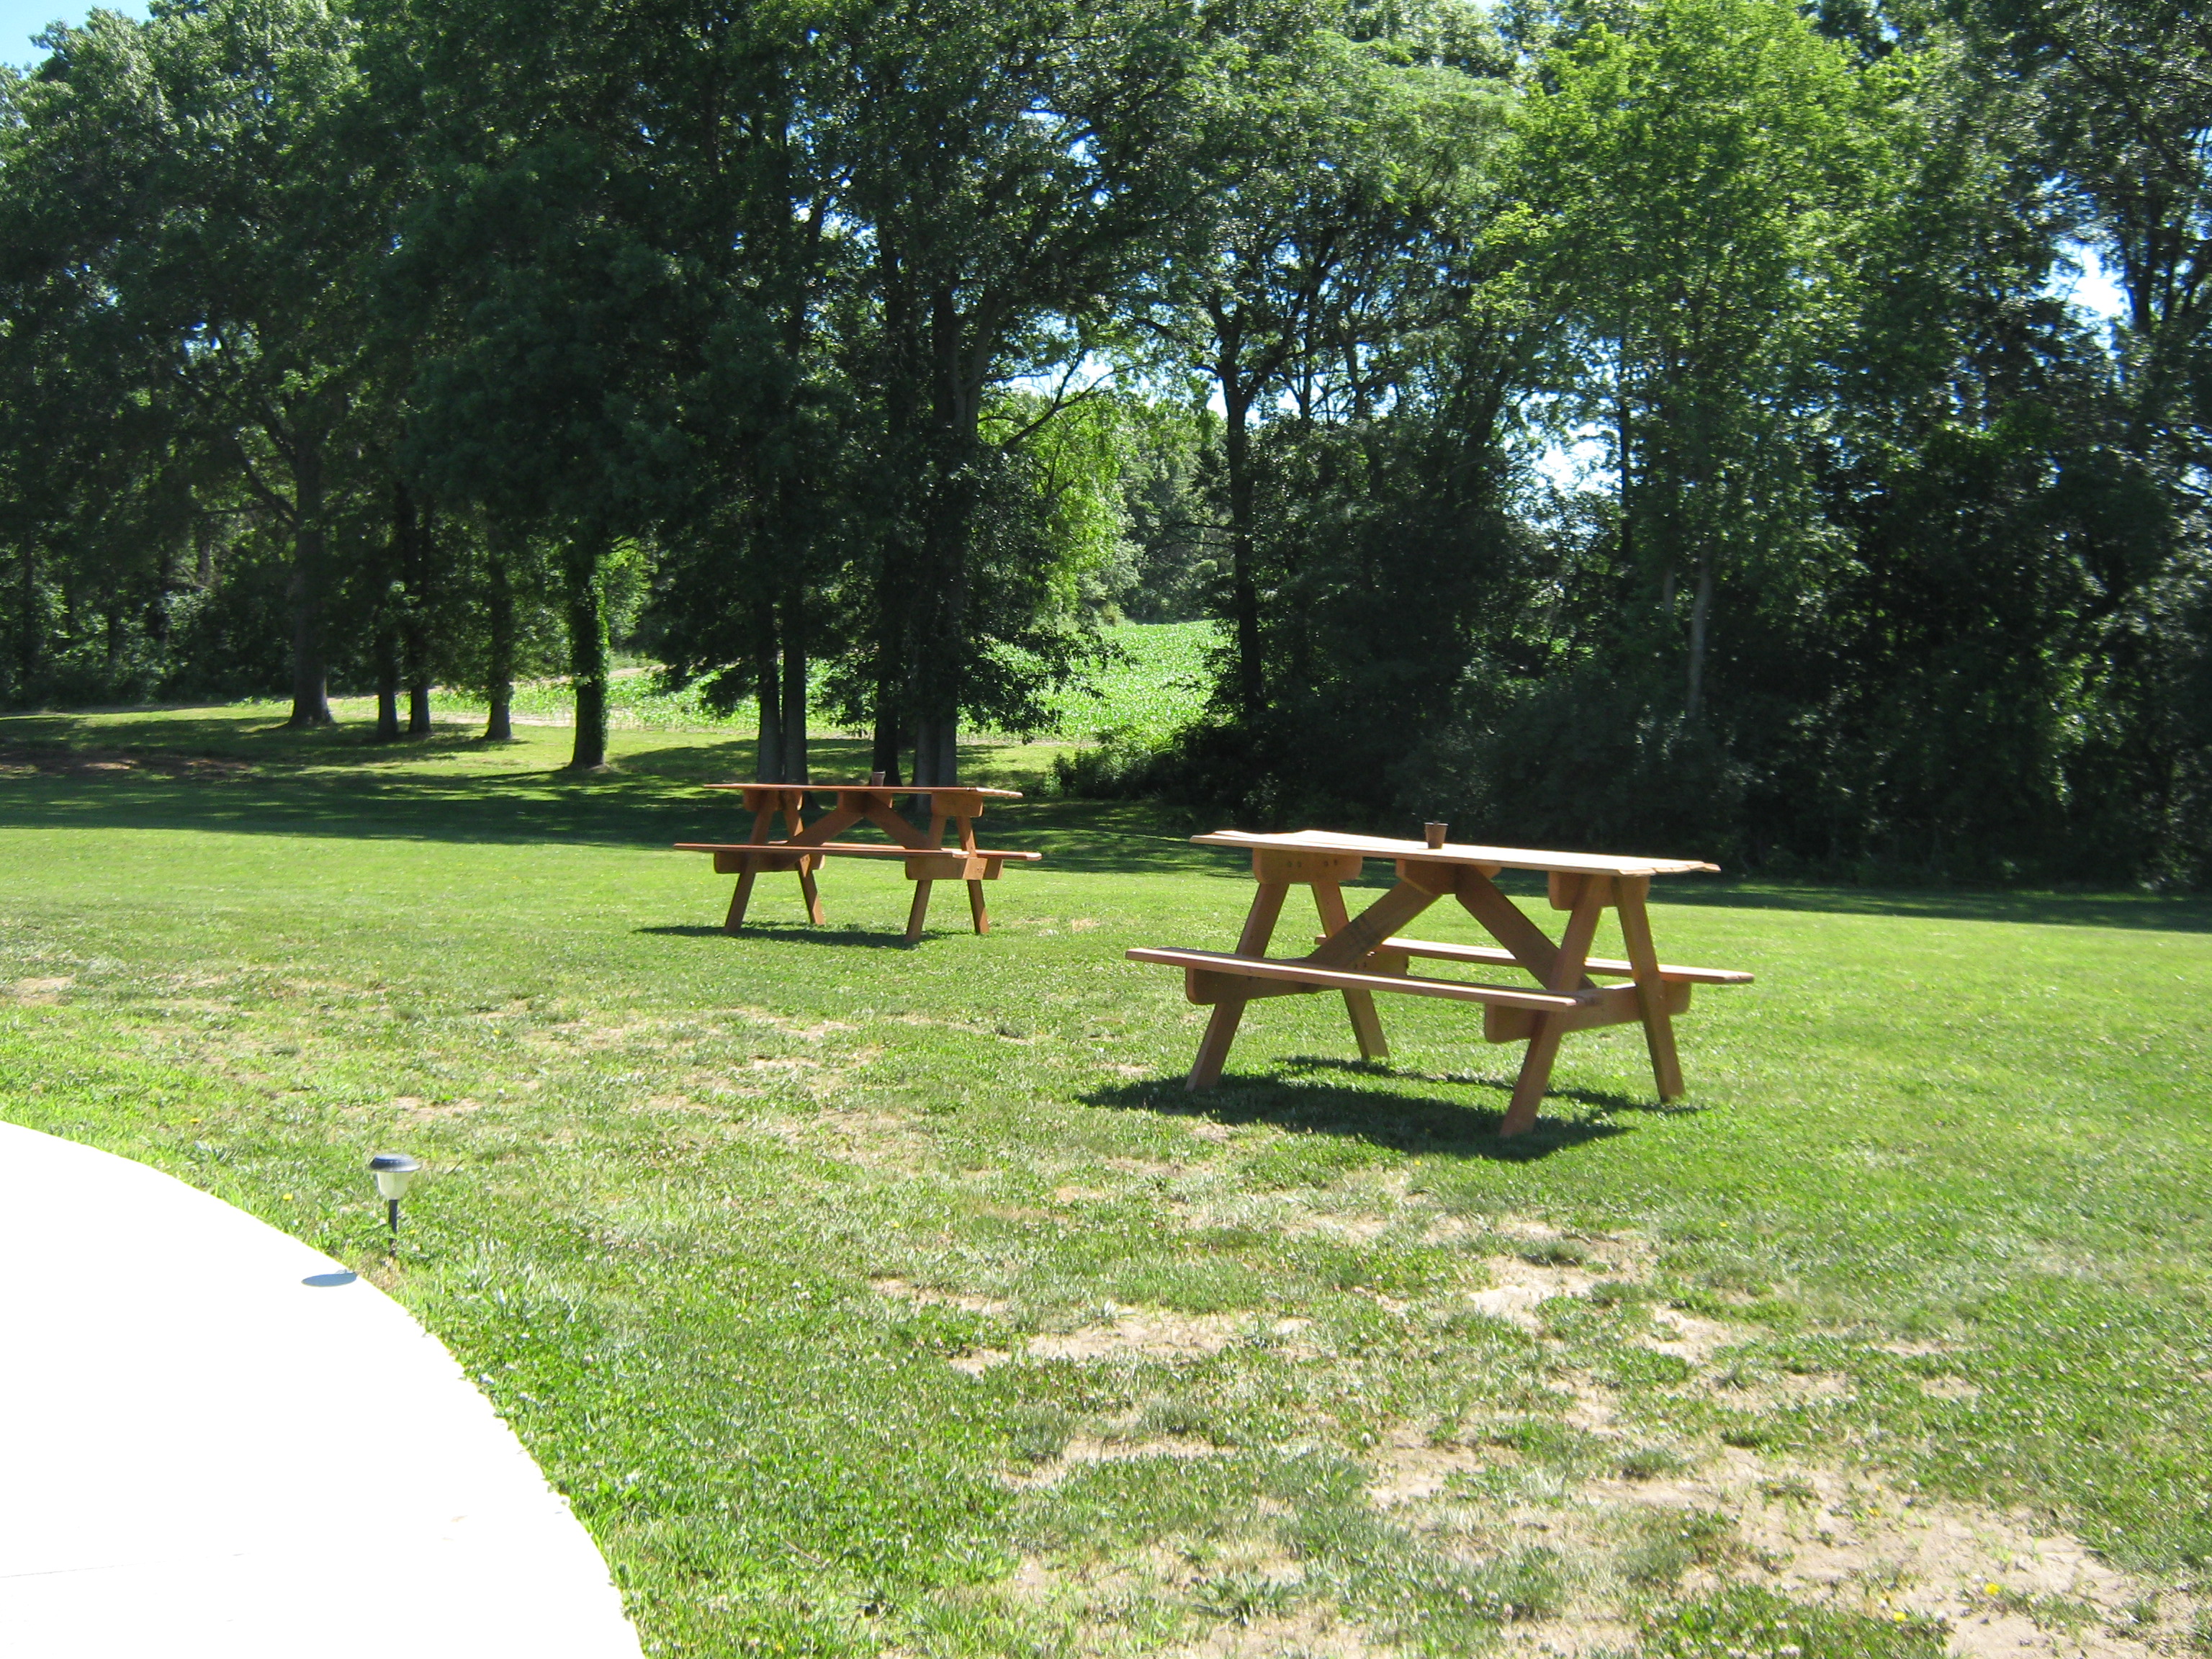 Hummingbird Vineyard and Winery- Two picnic tables sitting on green grass.